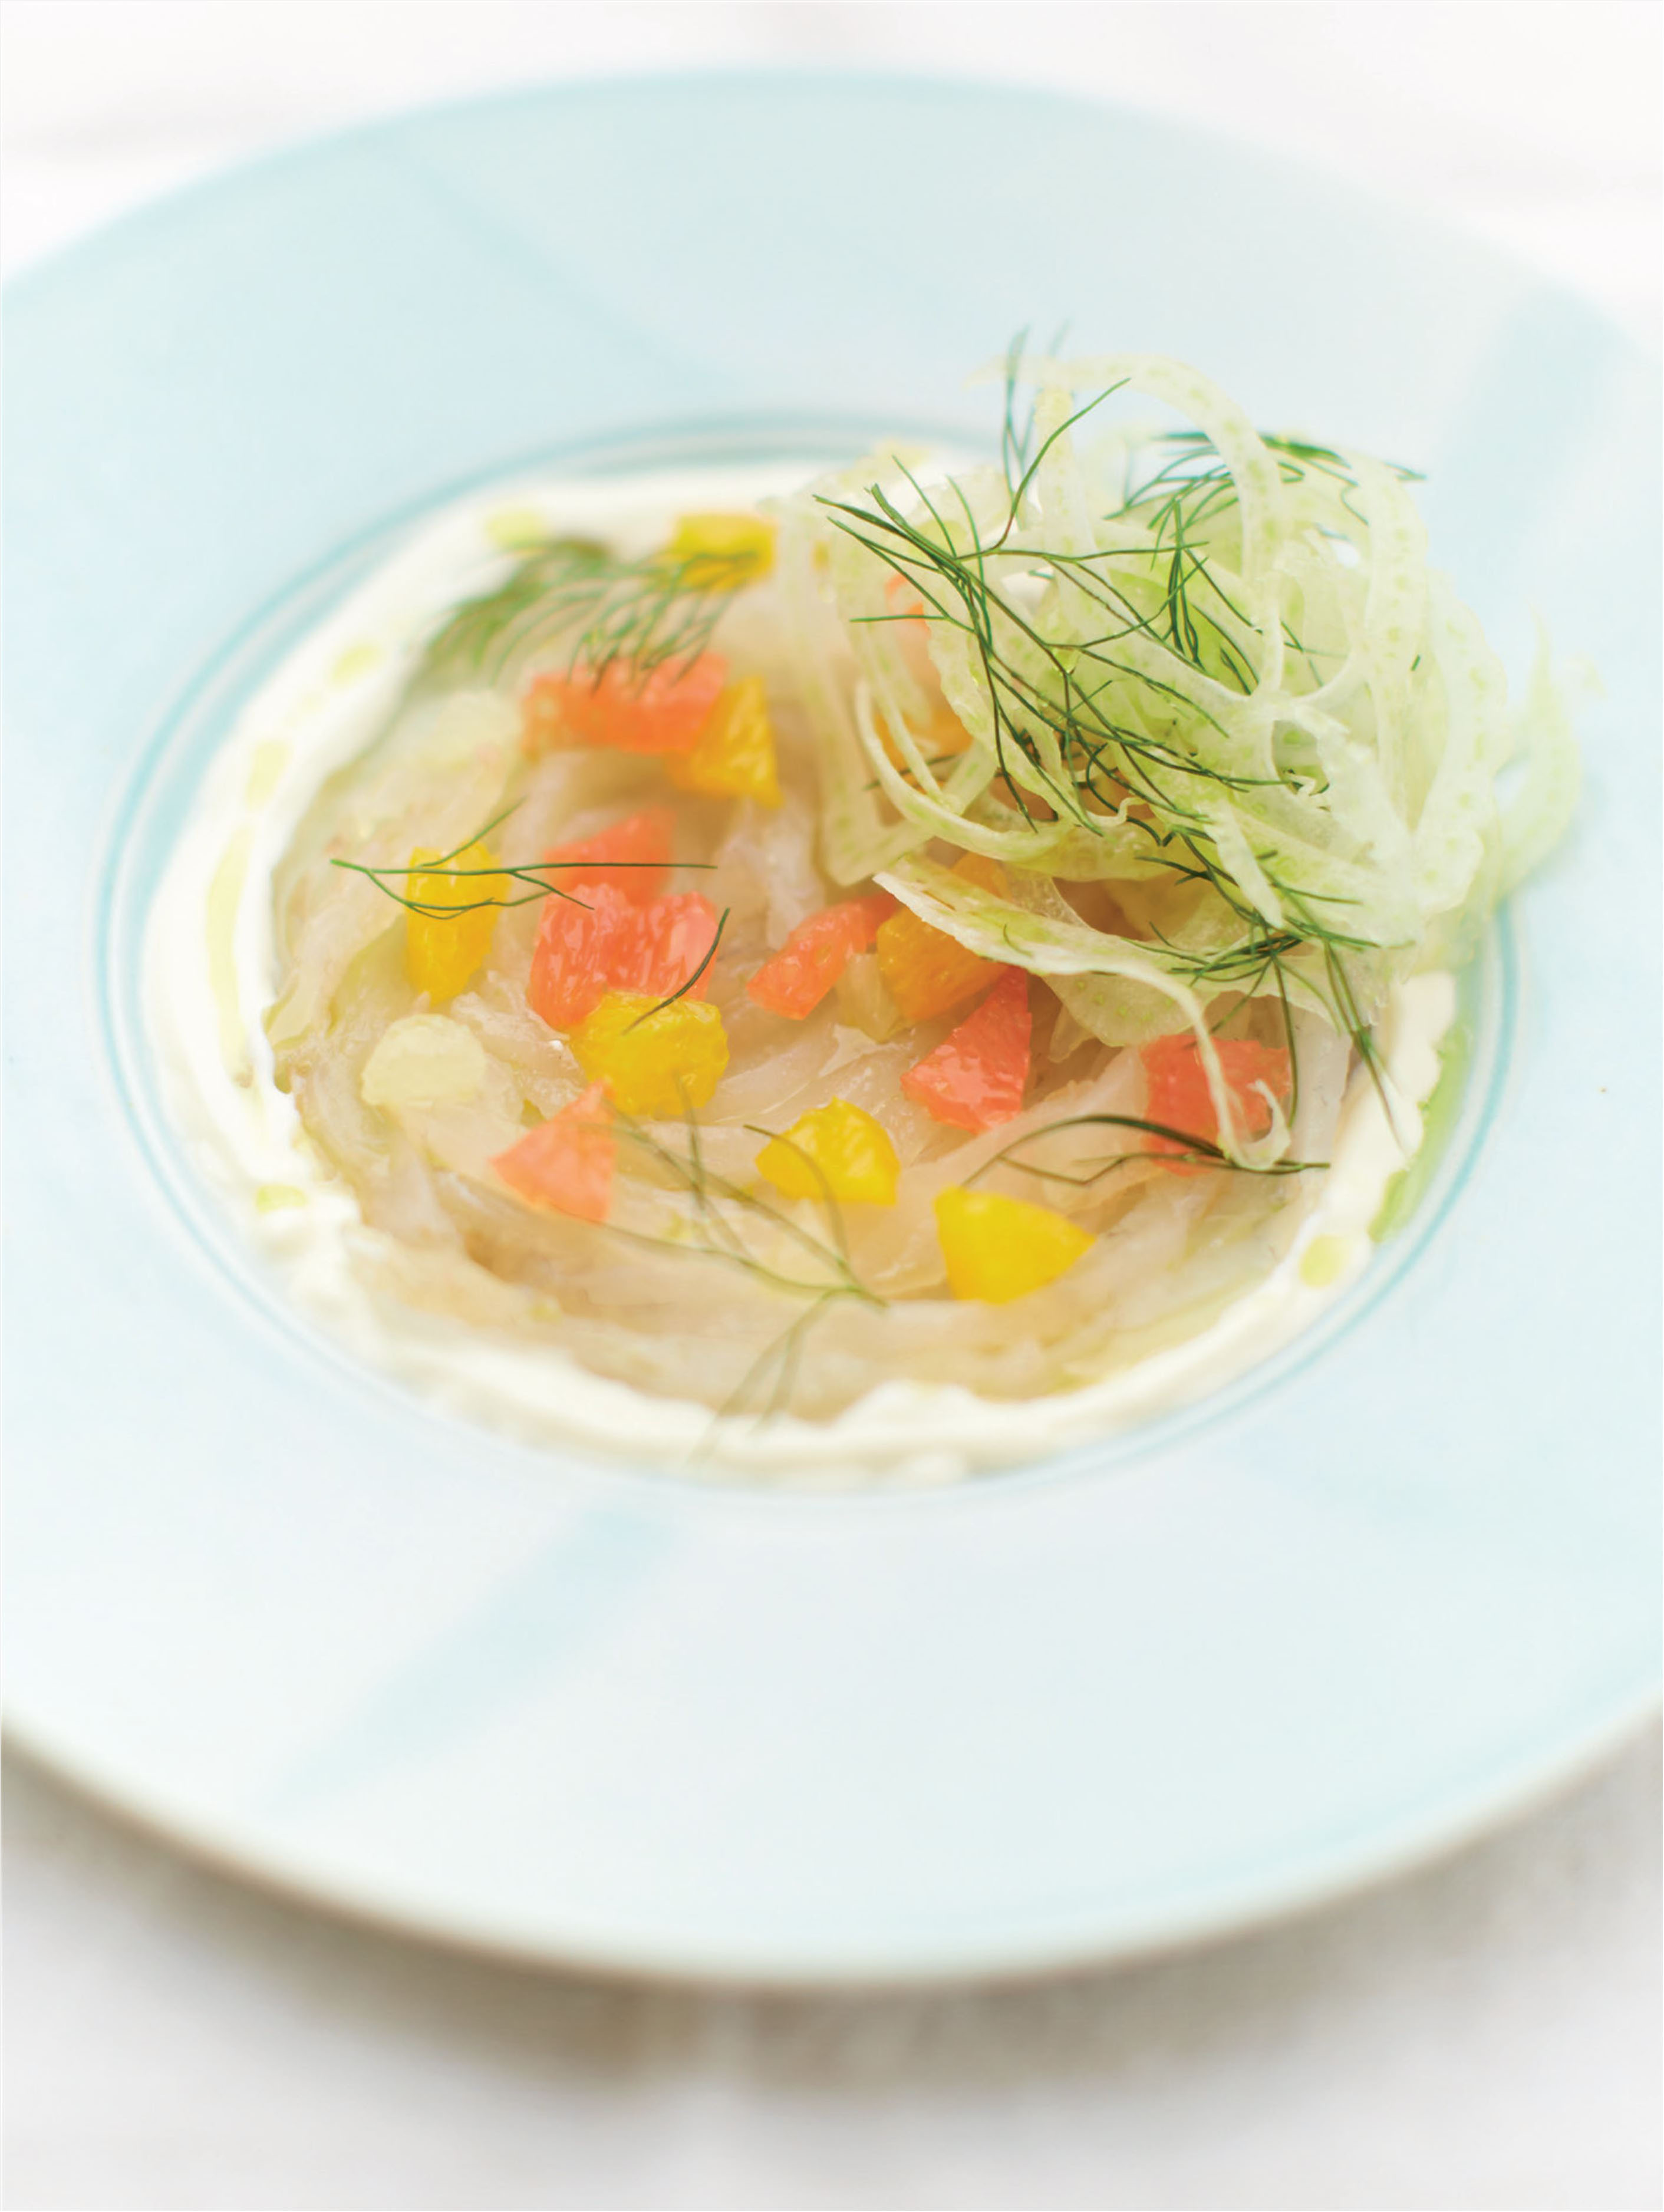 Cured wild bream with fennel, citrus fruit and pastis soured cream